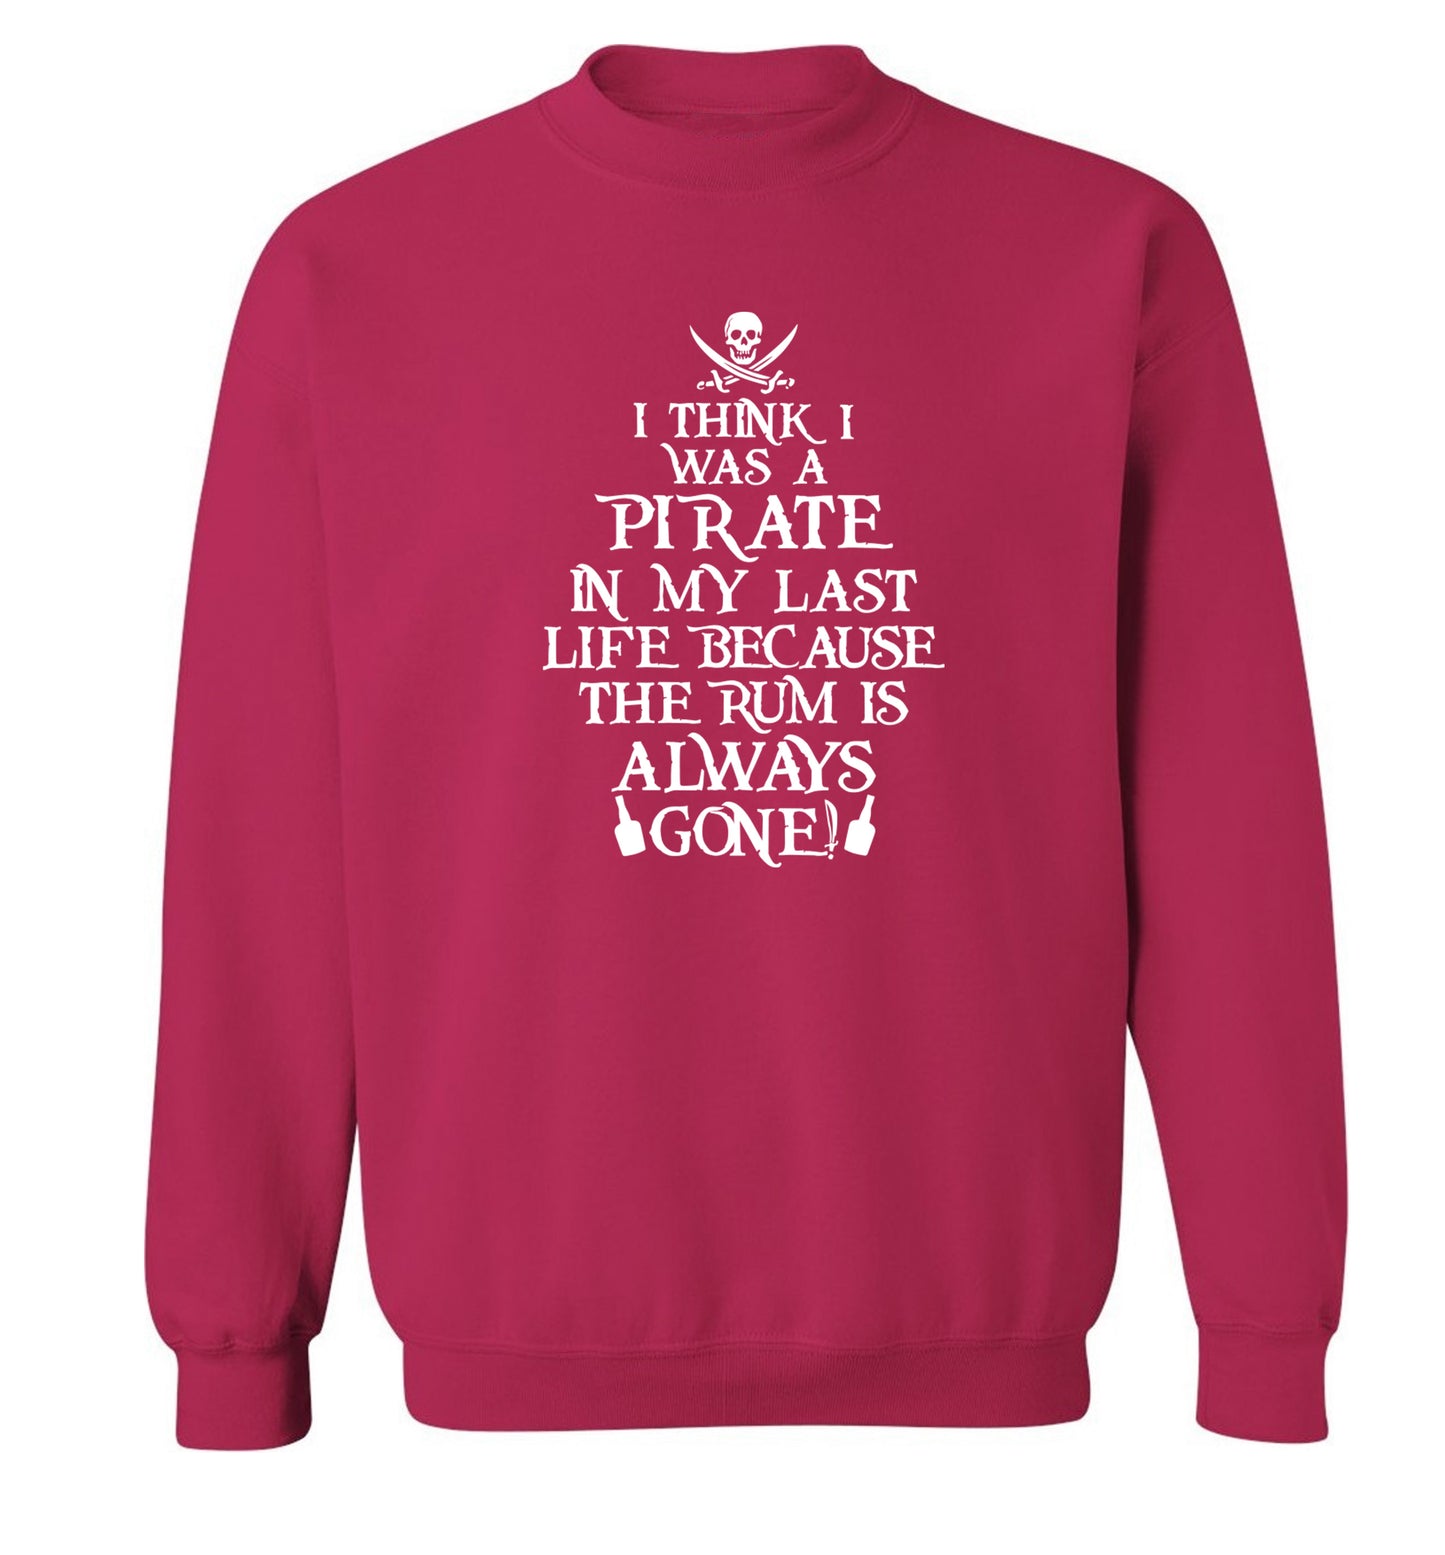 I think I was a pirate in my past life because the rum is always gone! Adult's unisex pink Sweater 2XL